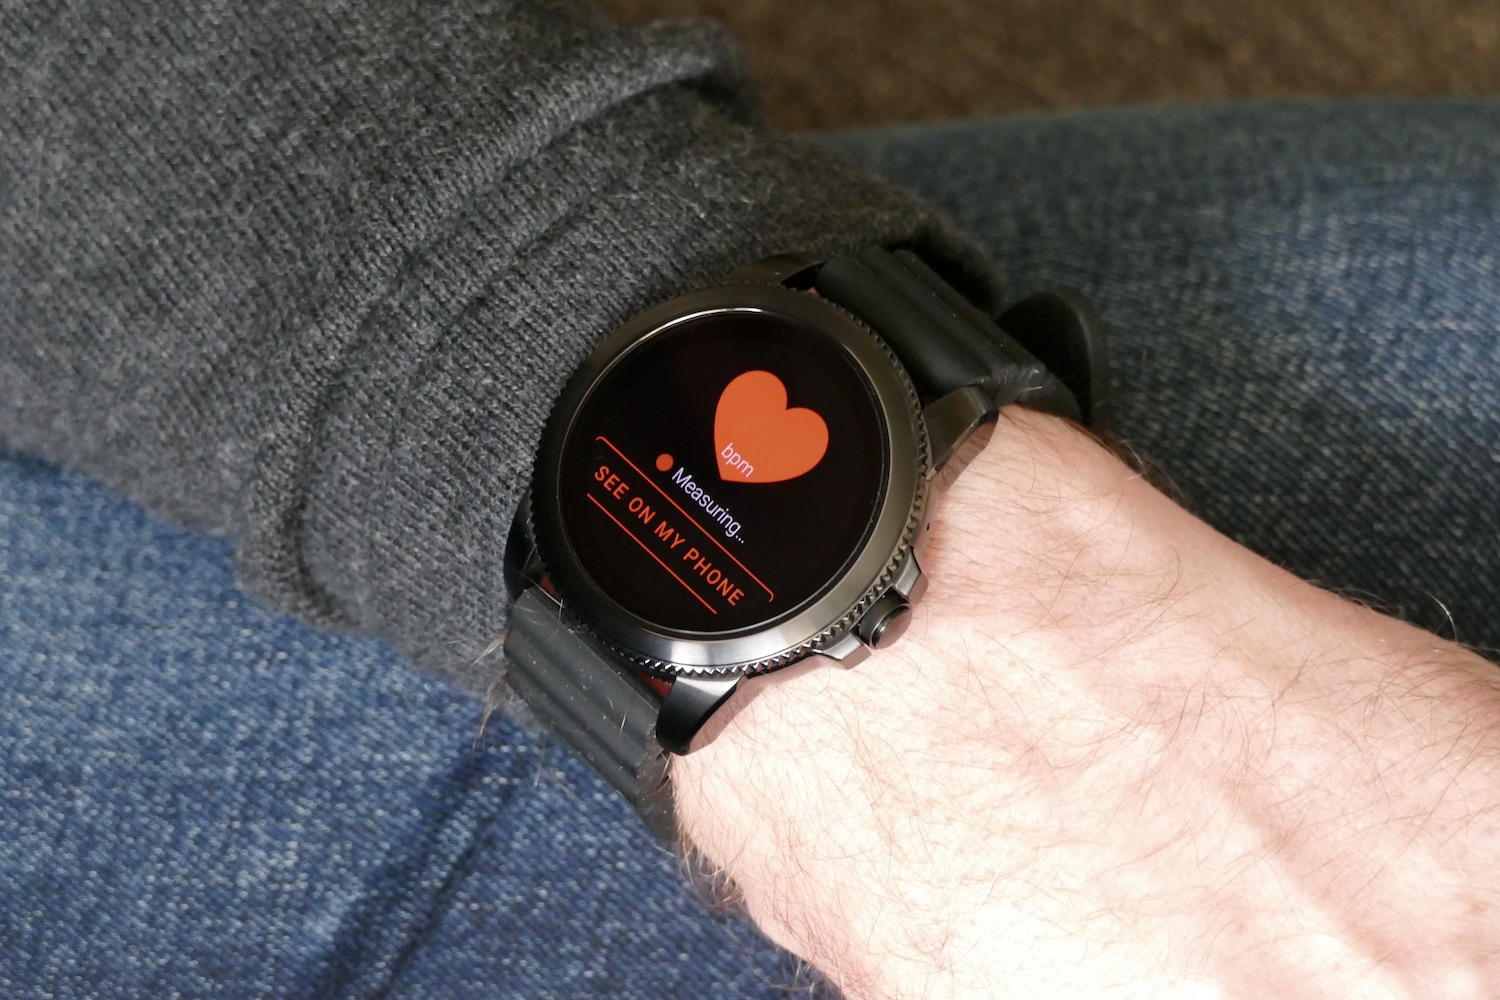 How one company made CES the best place for Wear OS watches - Techno ...